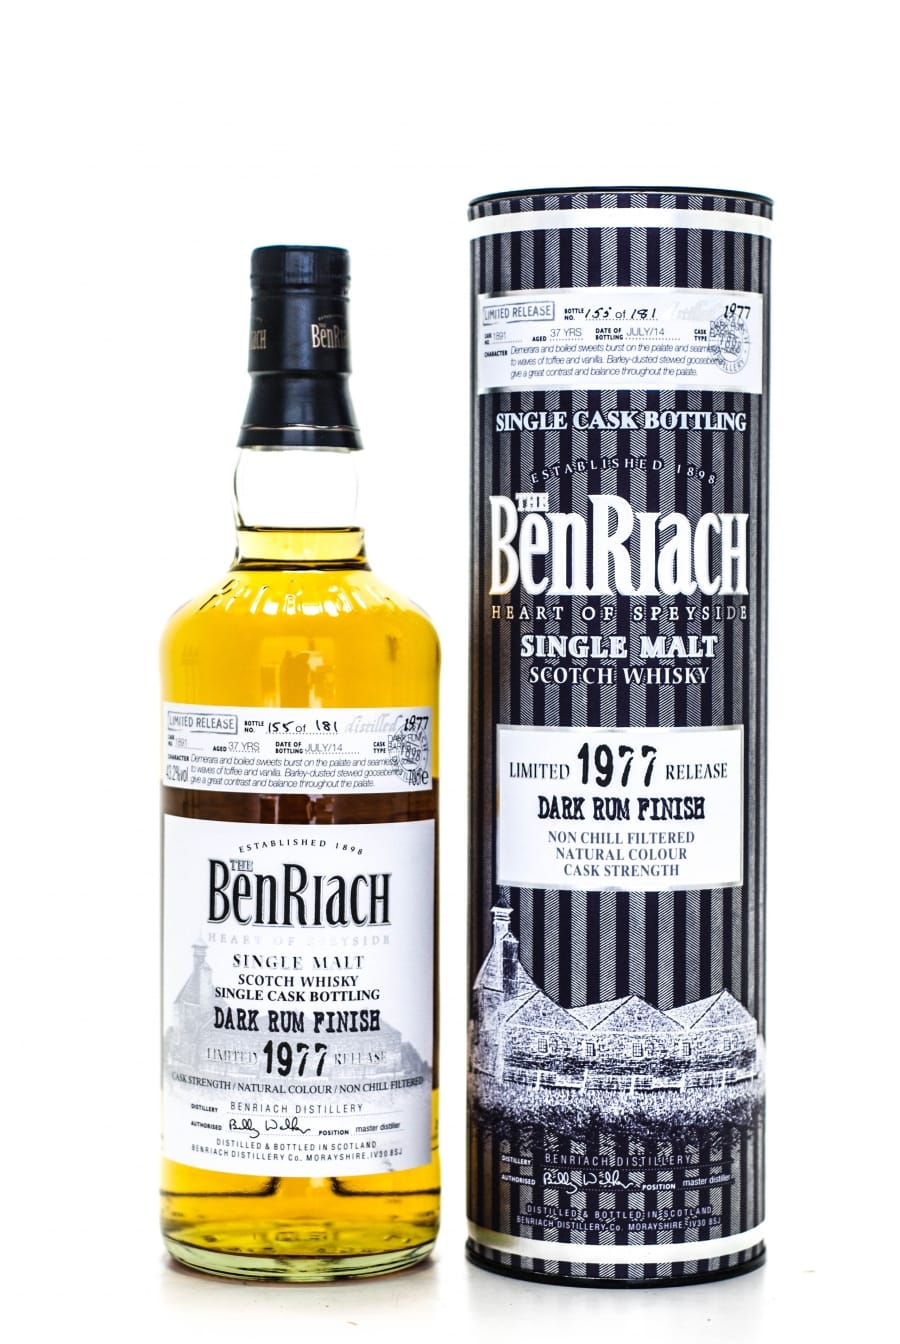 Benriach - Benriach 1977 Dark Rum Finish 37 Years Old  Cask 1891 Bottled July 2014 Batch 11 43.2% 1977 Perfect